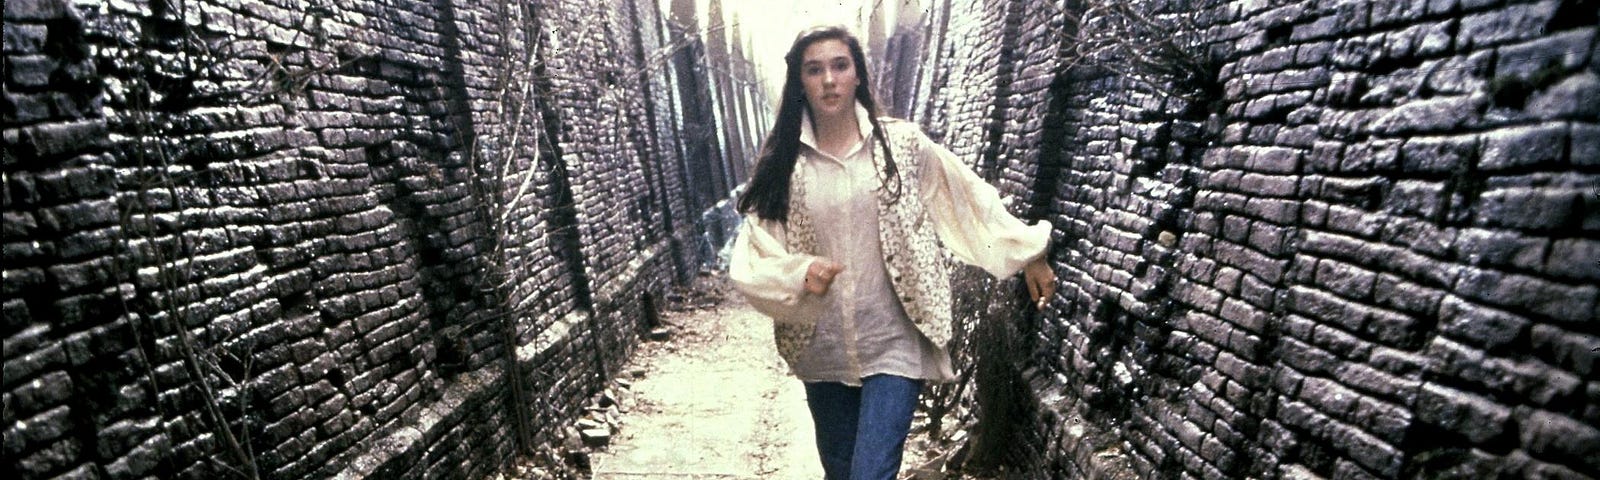 A scene from the movie Labyrinth: A young, white woman in a white poet’s blouse, vest, and jeans runs along a desolate labyrinth hallway with broken bricks and dead vines on an overcast day.